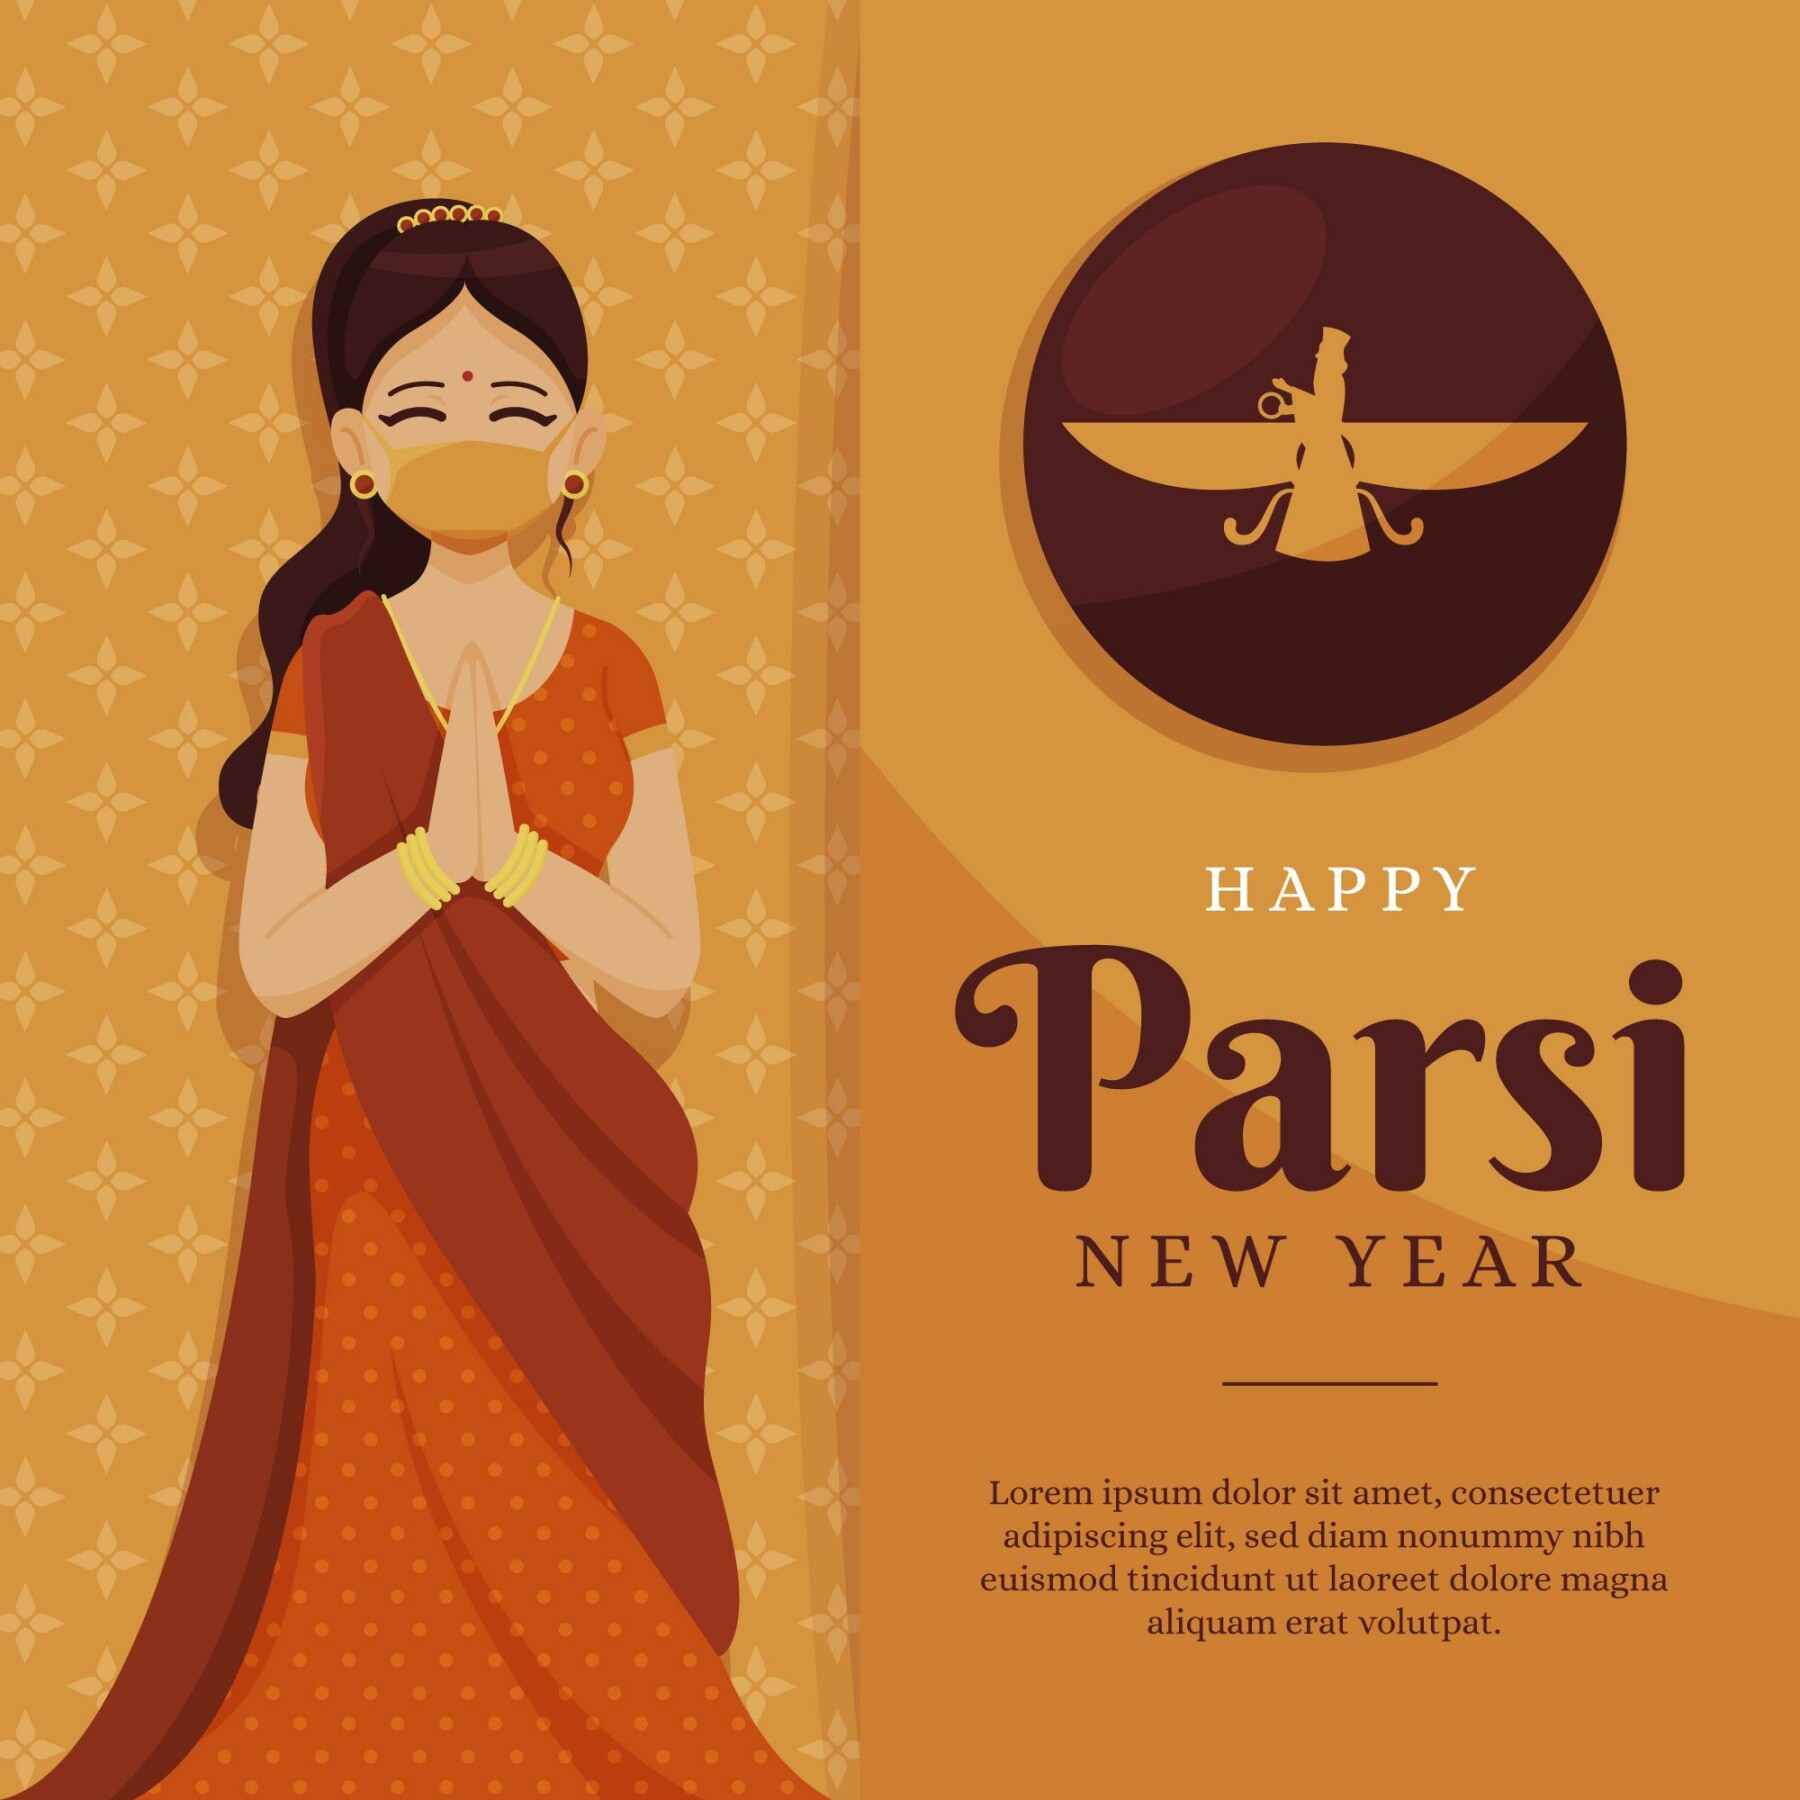 33 Parsi New Year Captions 2022 With Hashtags!